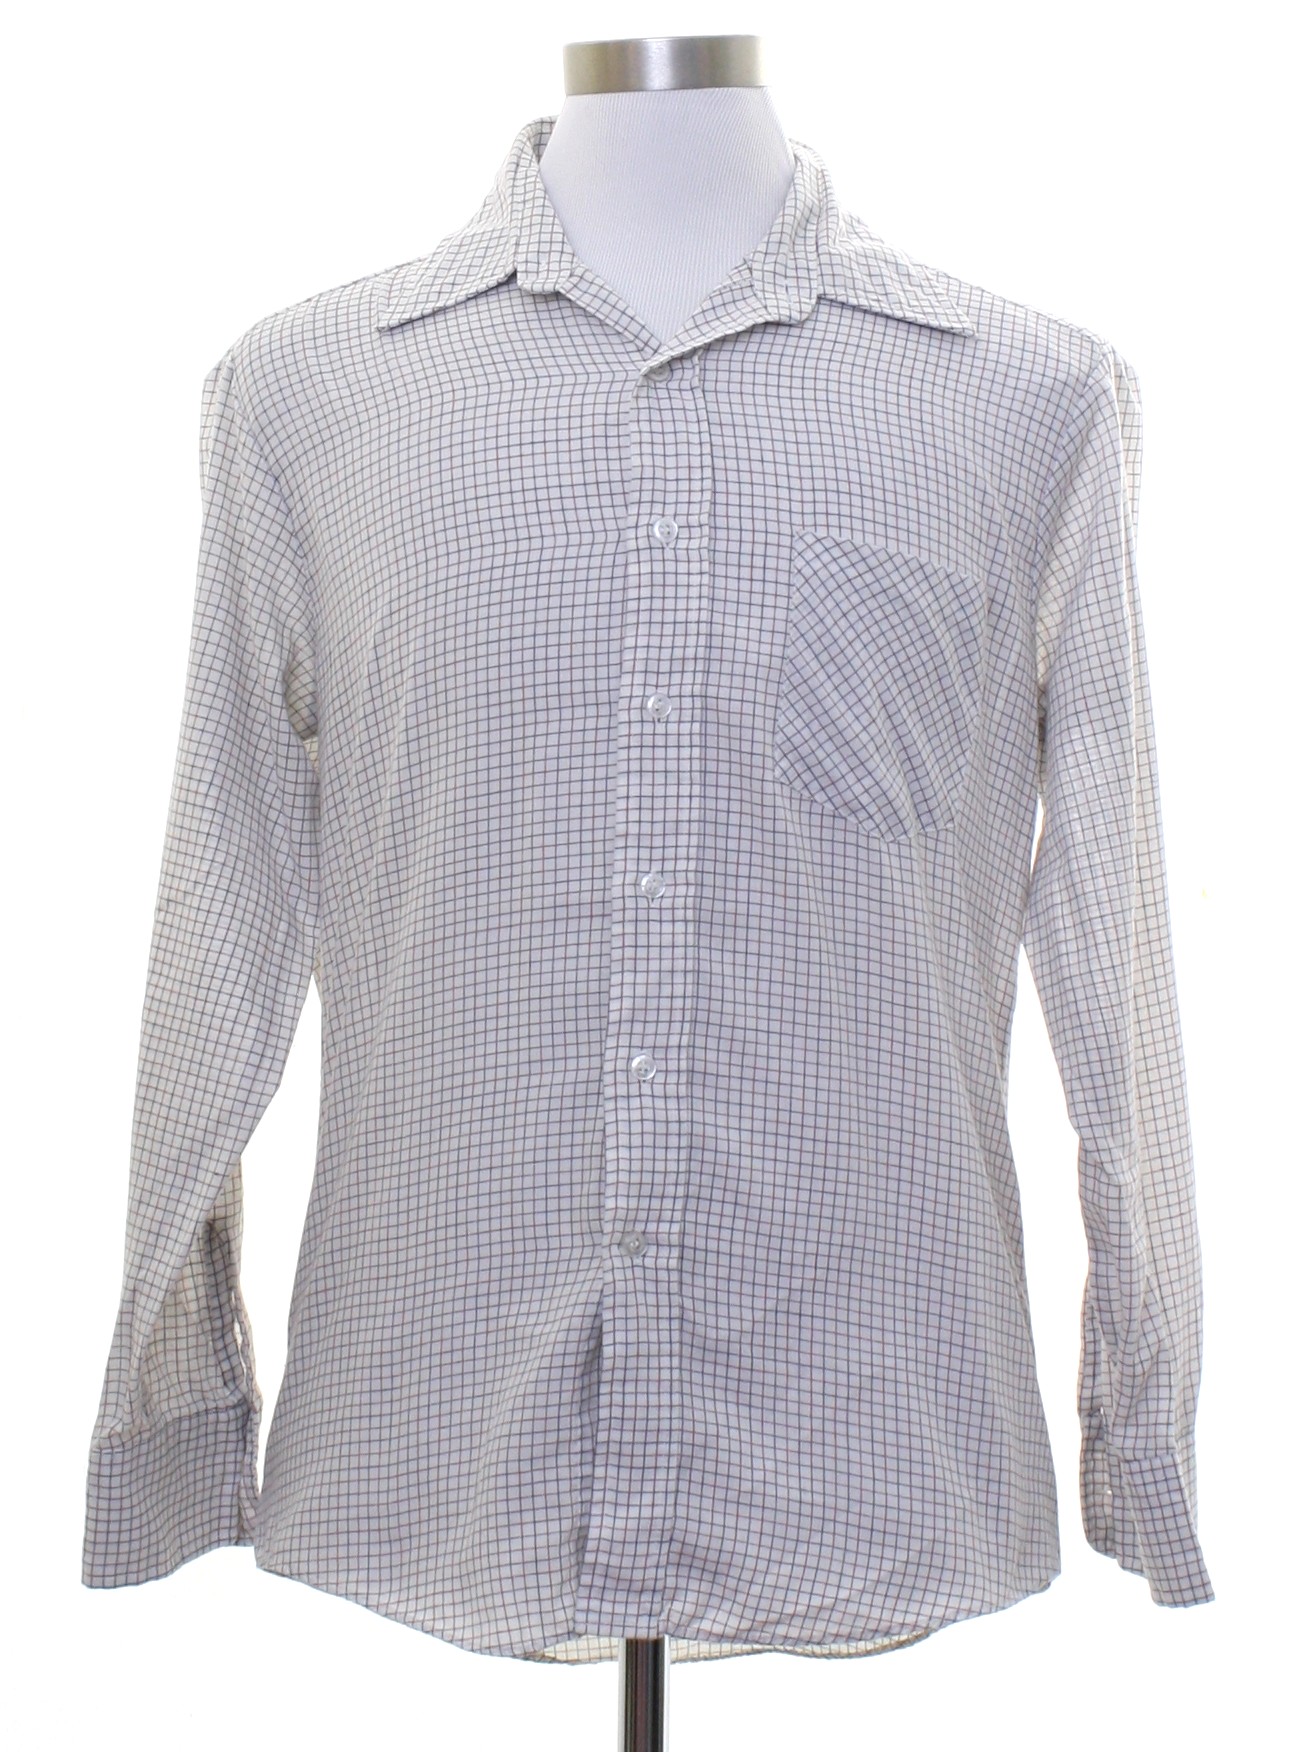 Retro 1970's Shirt (JC Penney) : Late 70s or Early 80s -JC Penney- Mens ...